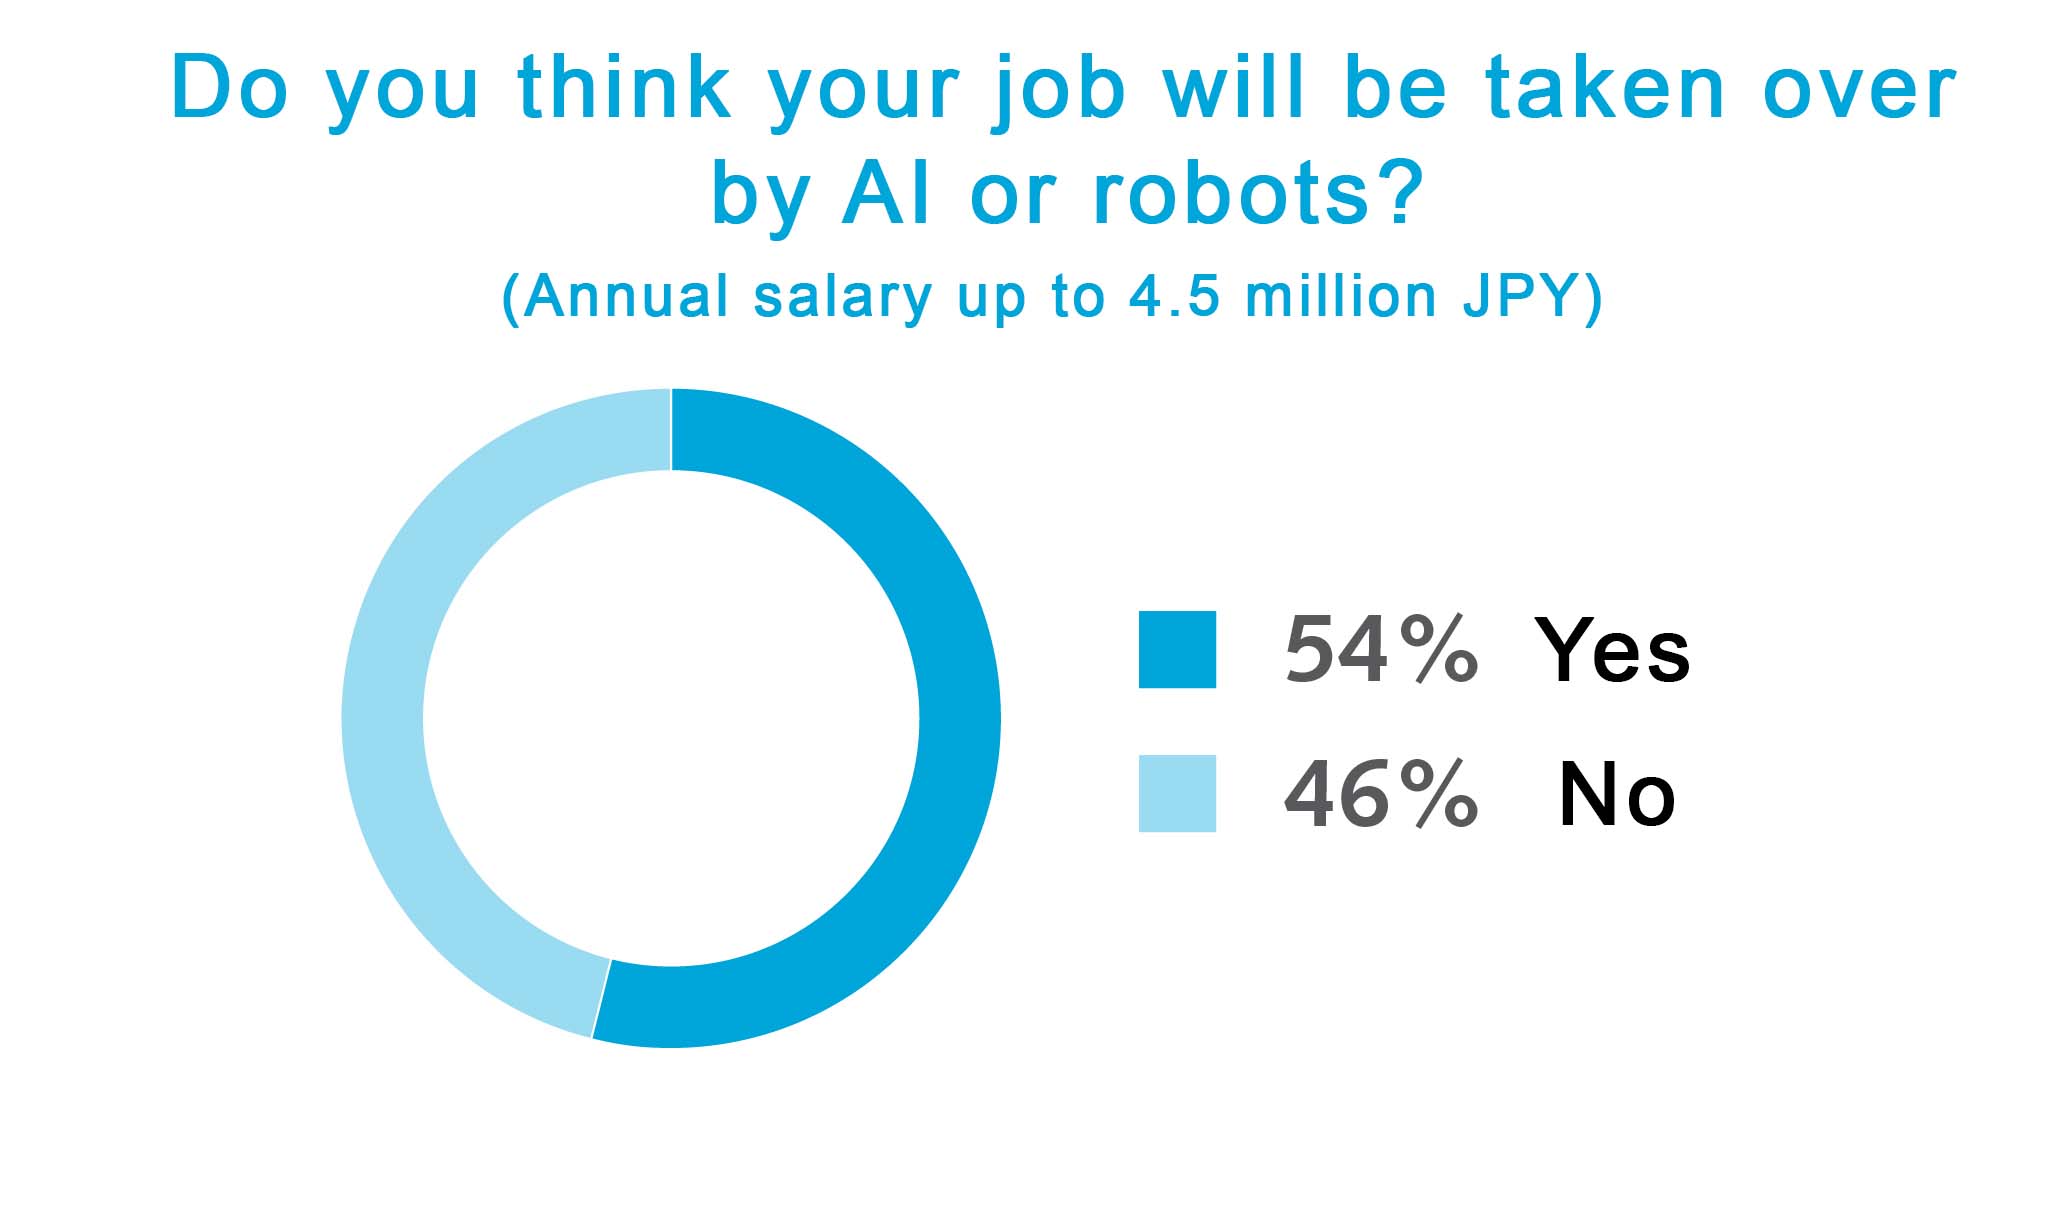 Do you think your job will be taken over by AI or robots? (Annual salary up to 4.5 million JPY)